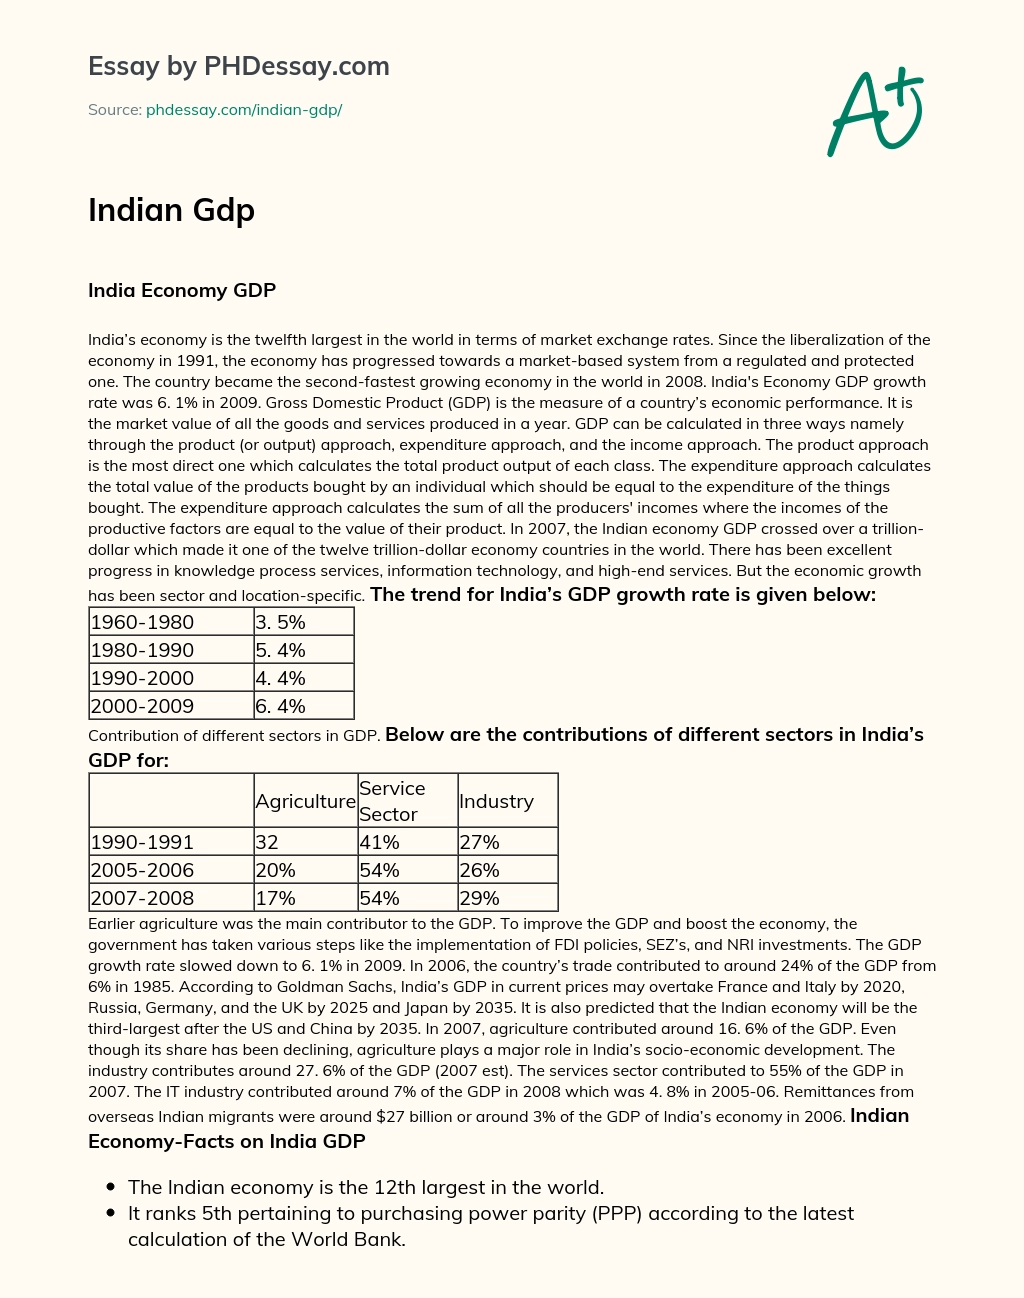 Indian Gdp essay